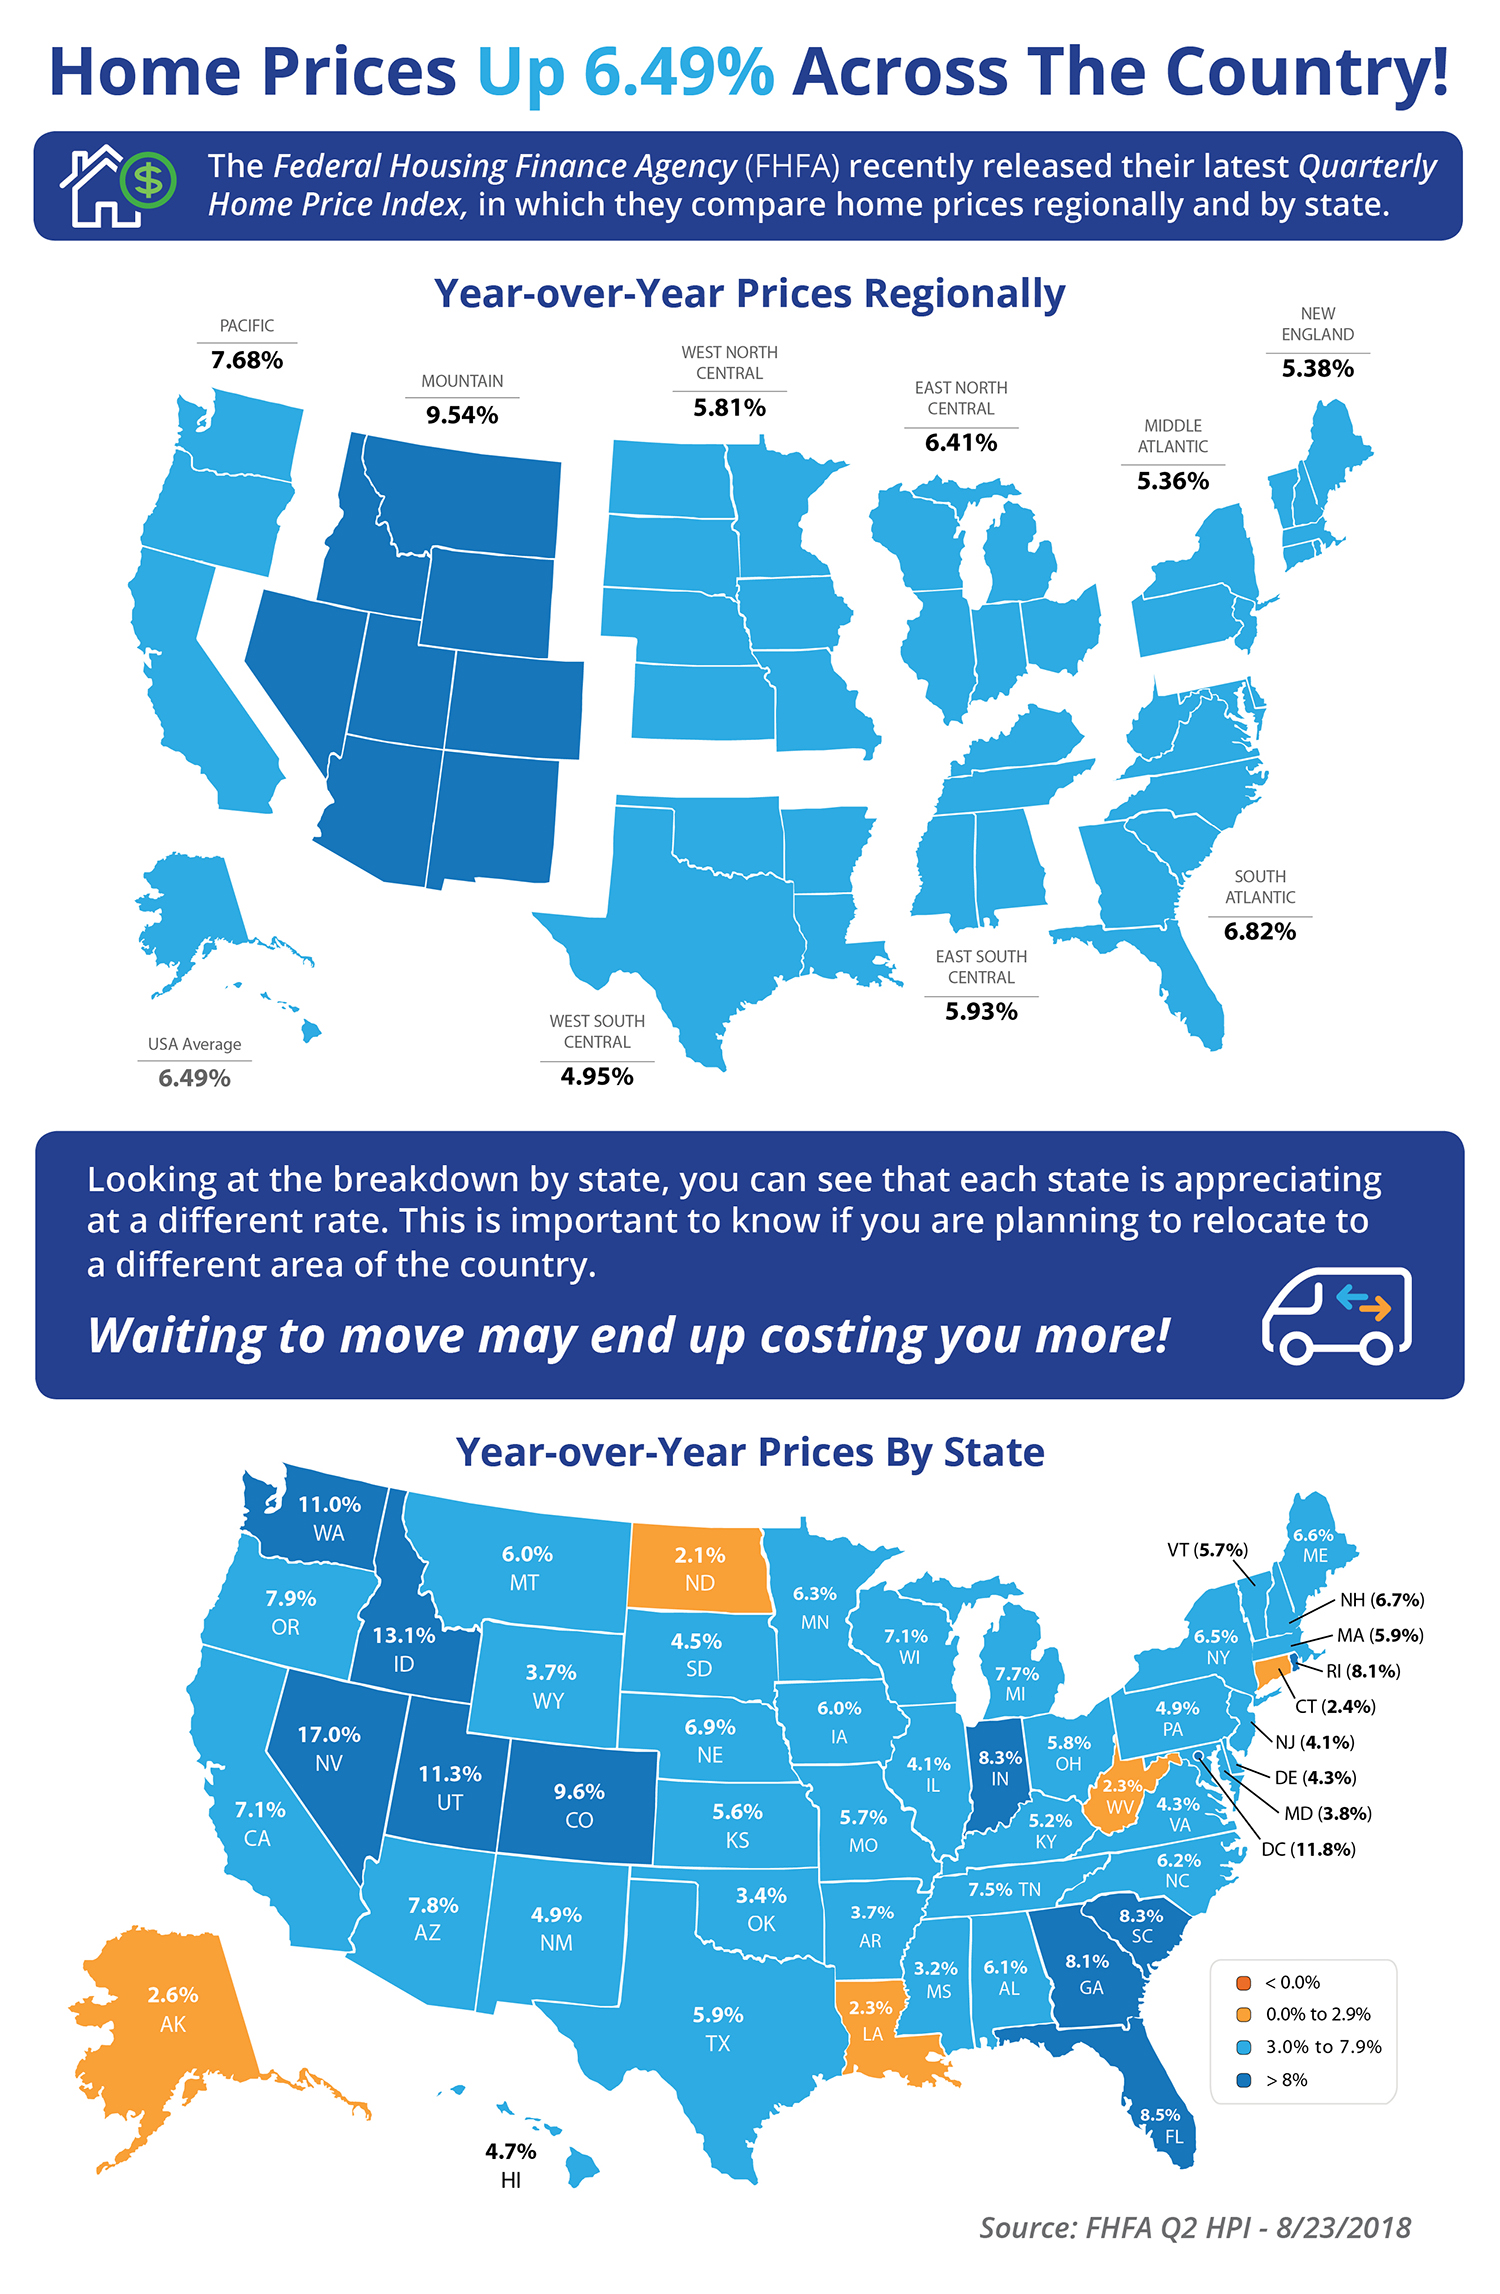 Home Prices Up 6.49% Across the Country! [INFOGRAPHIC] | Simplifying The Market